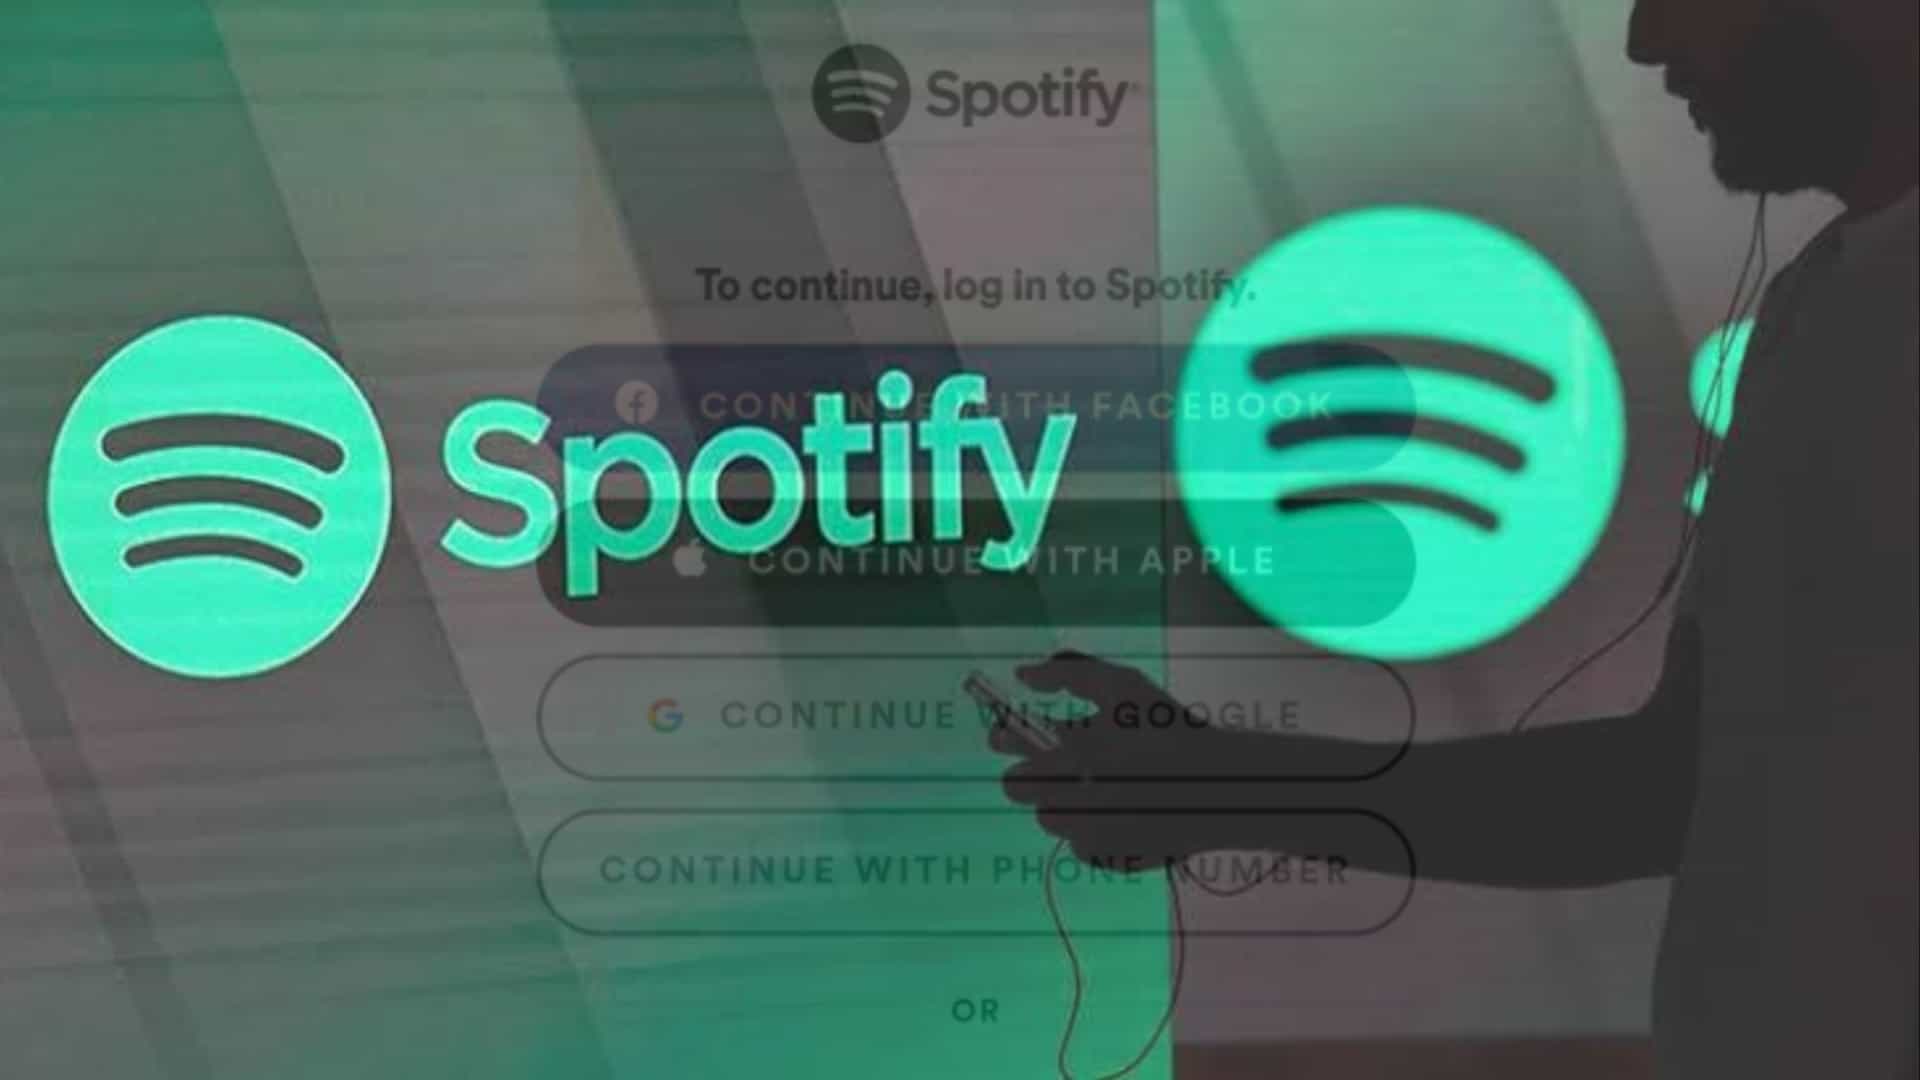 Spotify Now Lets Users Login With Google Account, But Only on Android